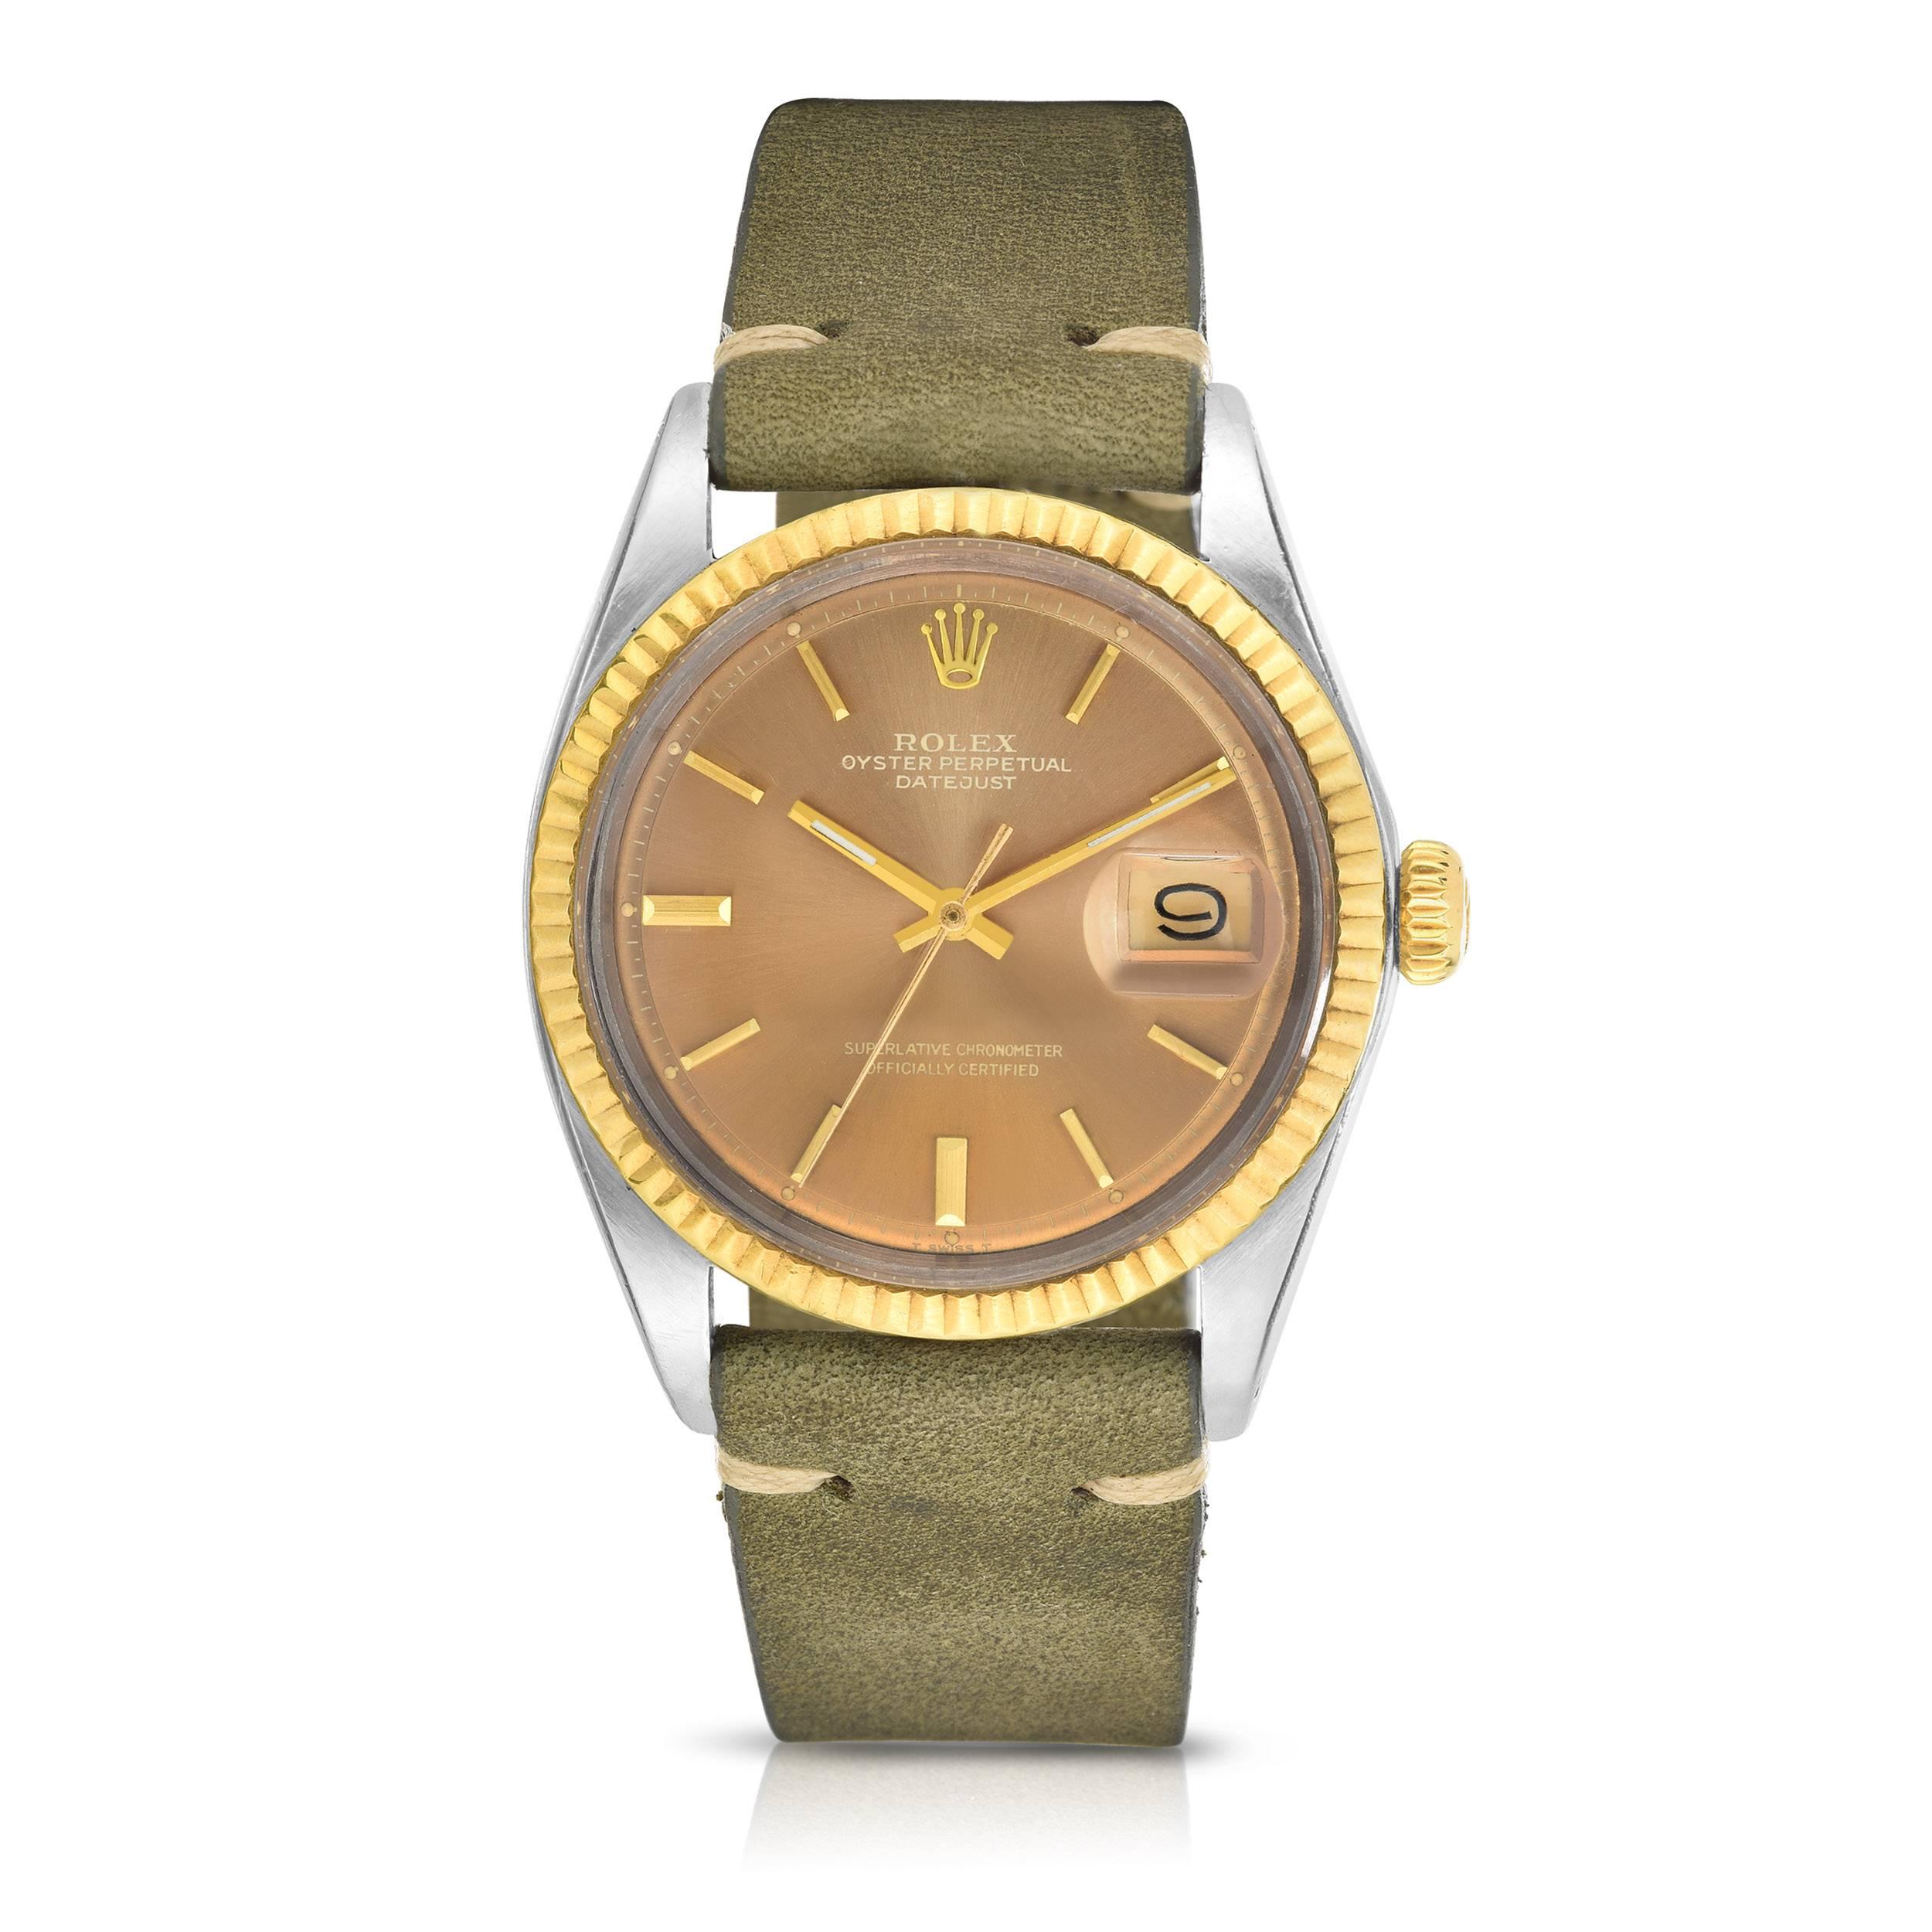 Rolex Stainless Steel and Yellow Gold Oyster Perpetual Datejust Watch
Beautiful Factory Golden Grey 'Pie-Pan' Dial with Applied Hour Markers
Yellow Gold Gold Fluted Bezel
Stainless Steel Case
36mm in size 
Features Rolex Automatic Movement with